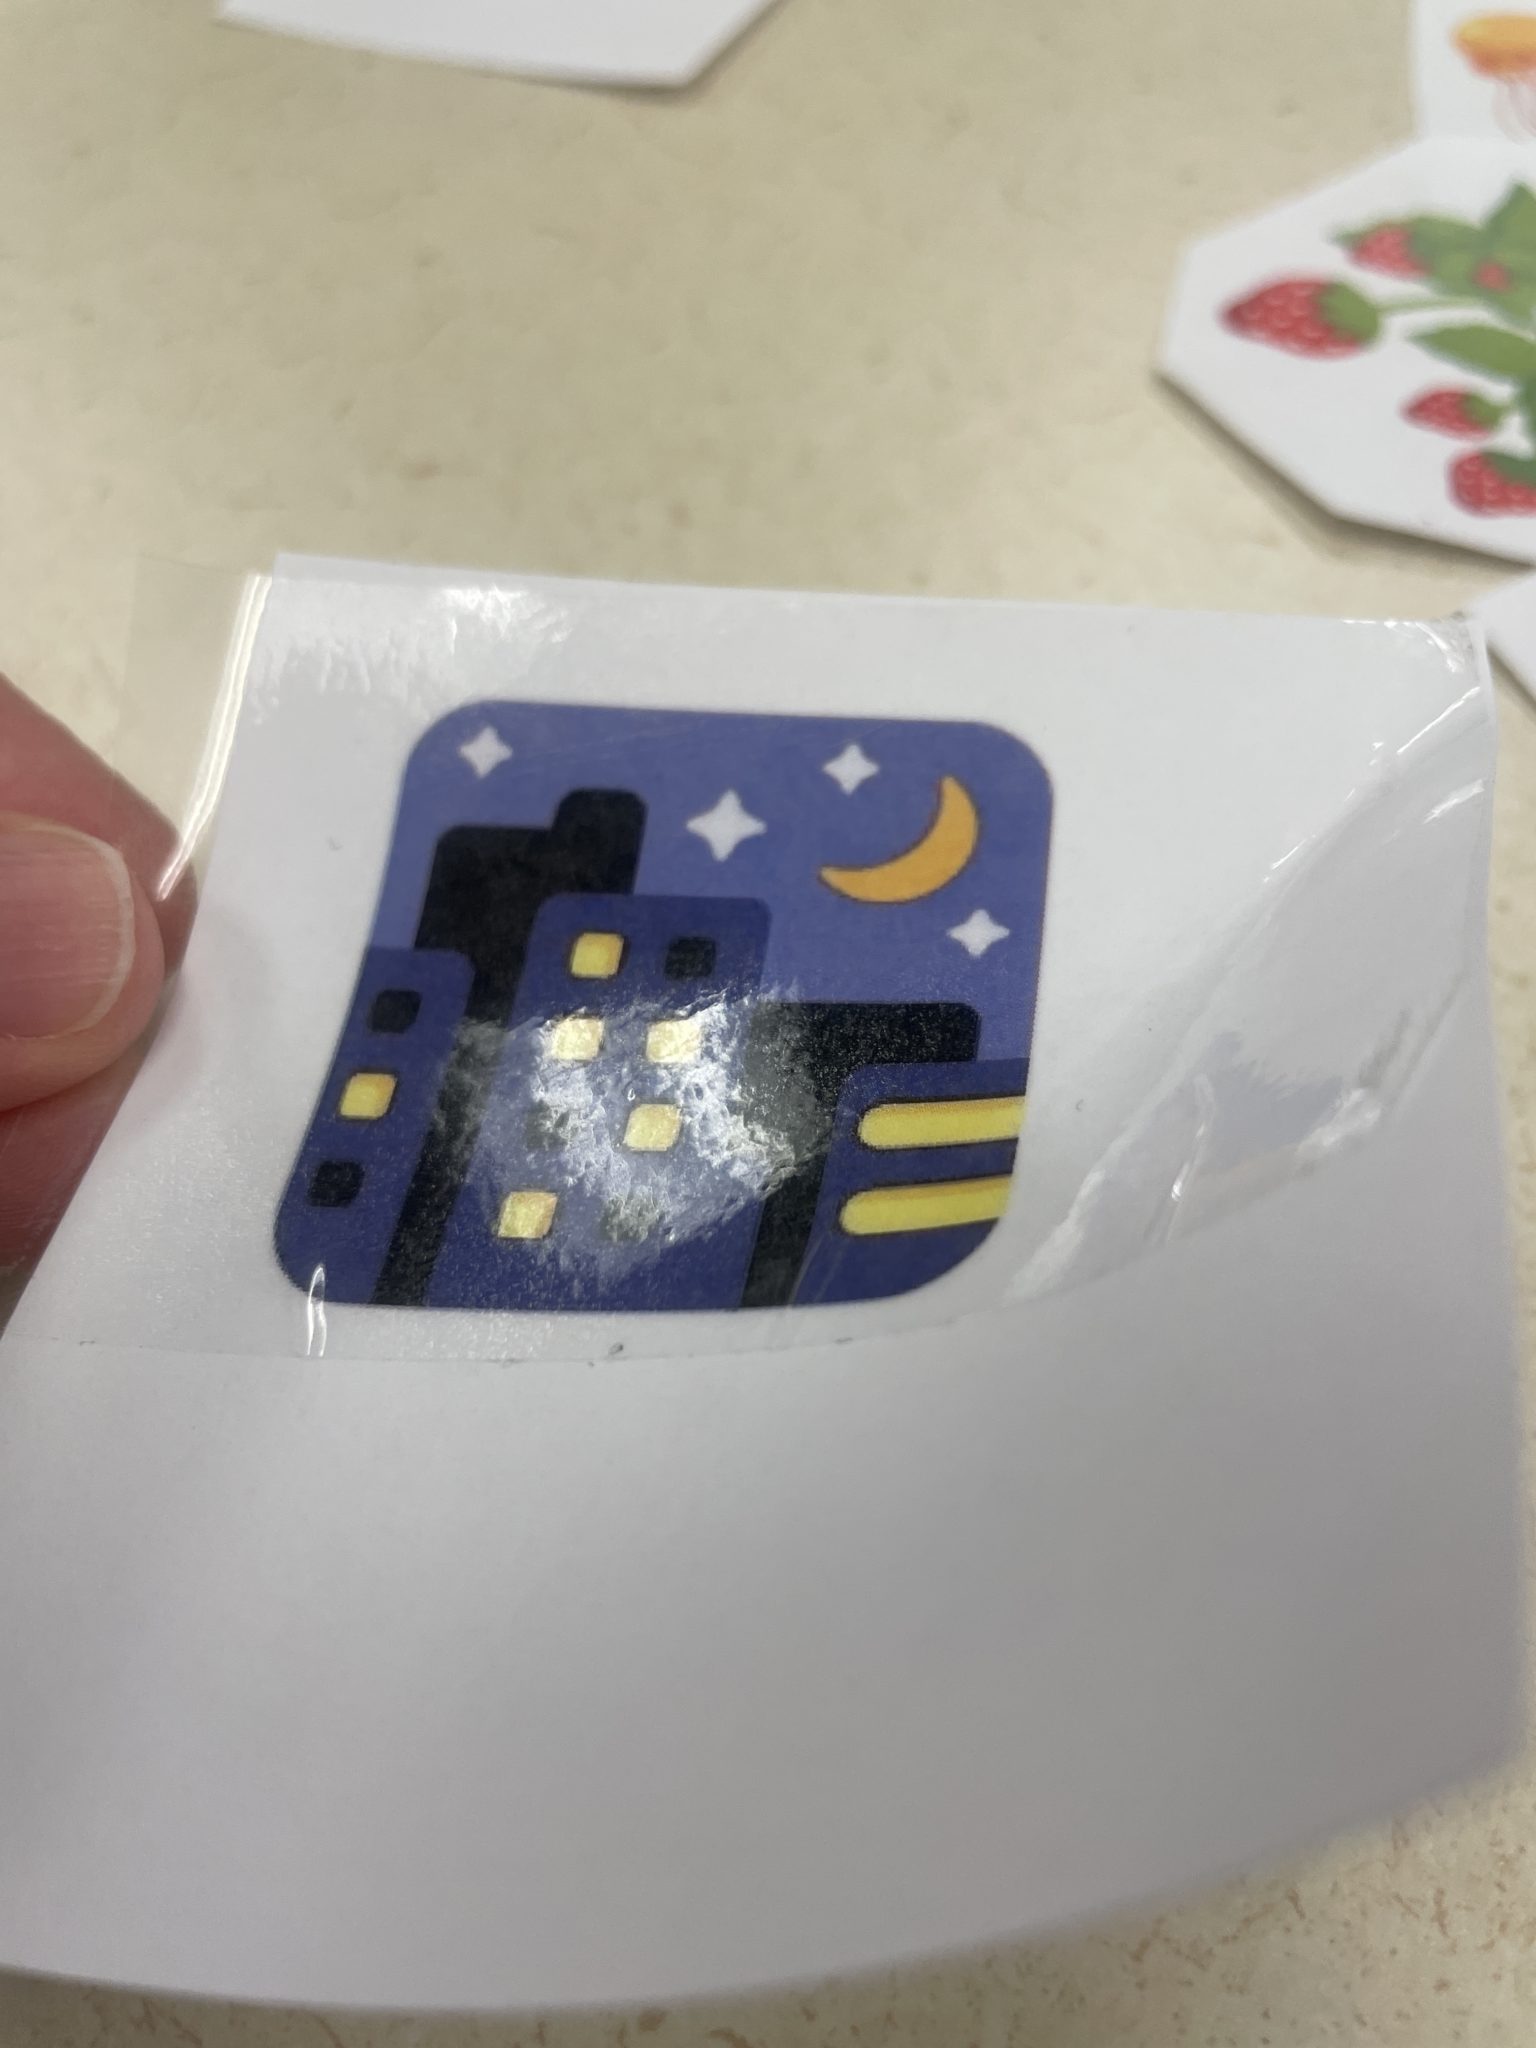 Photograph of a white hand carefully laying a piece of packing tape over a toner-printed image of the night with stars emoji, making sure there are no creases or air bubbles in the tape as it is laid over the image. 